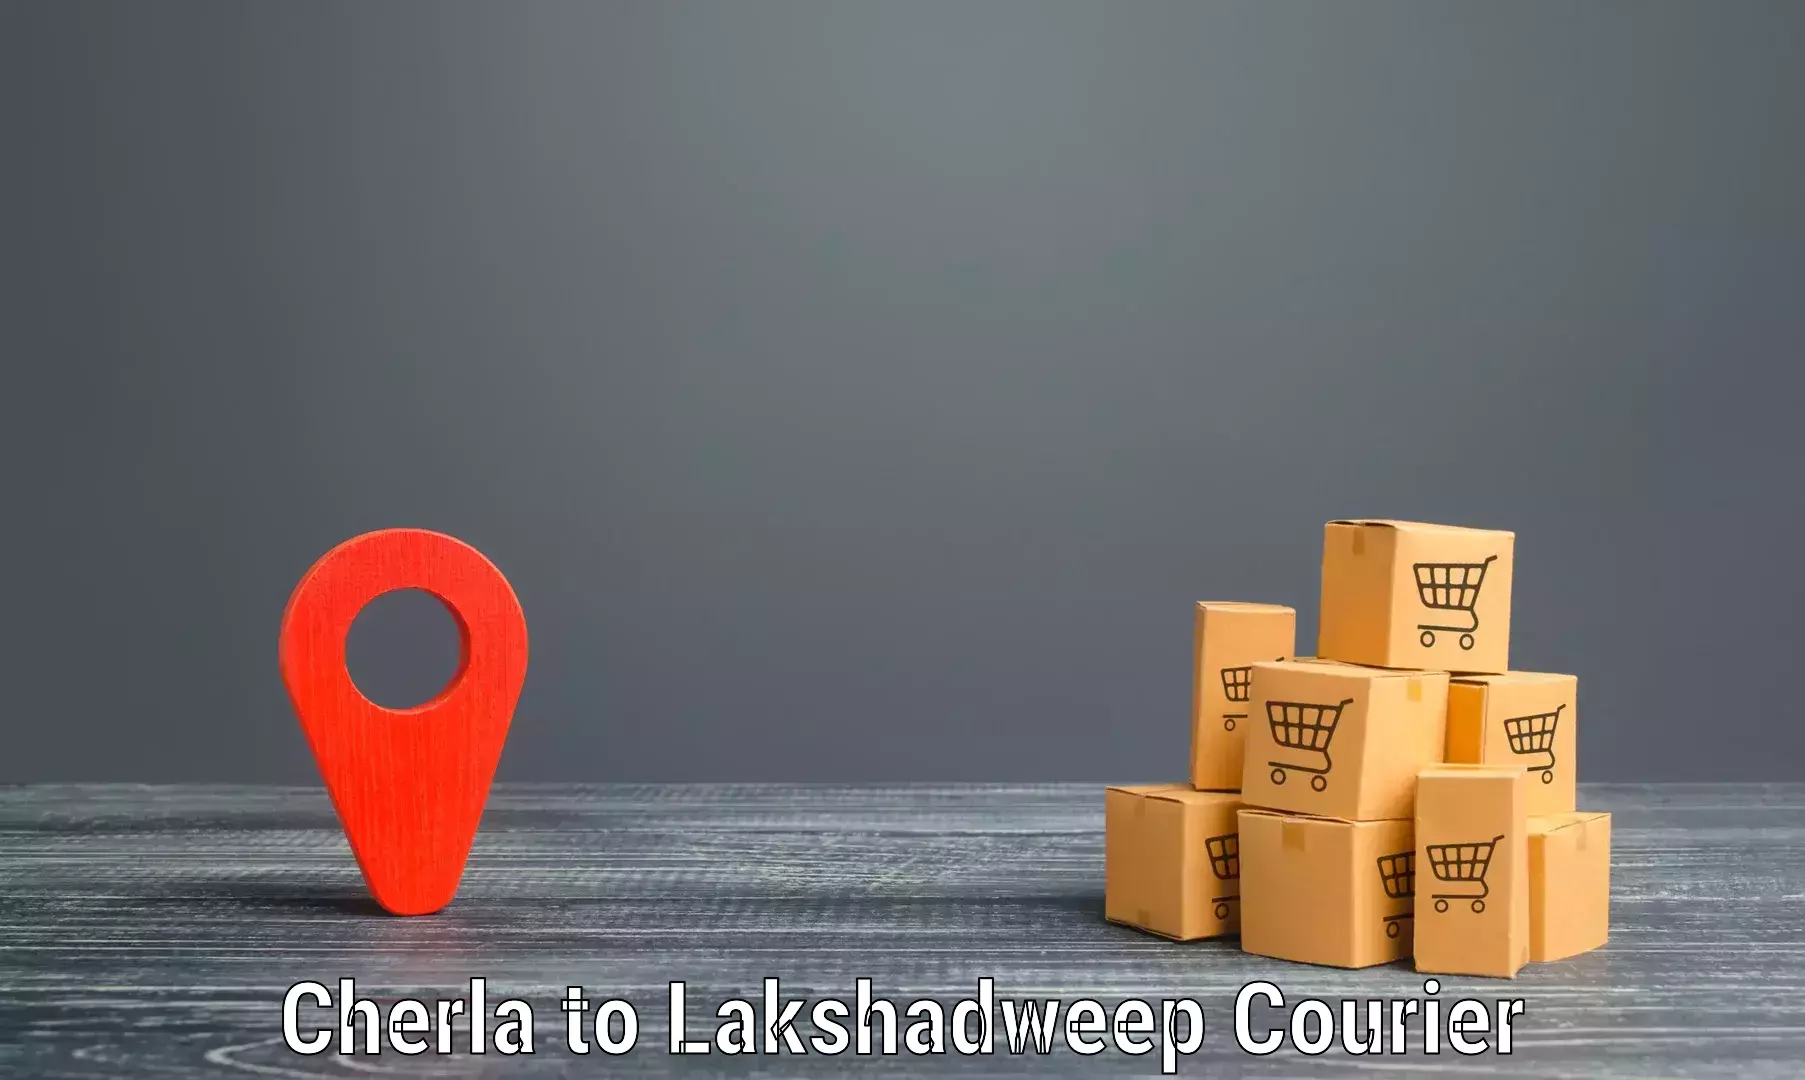 International courier networks Cherla to Lakshadweep